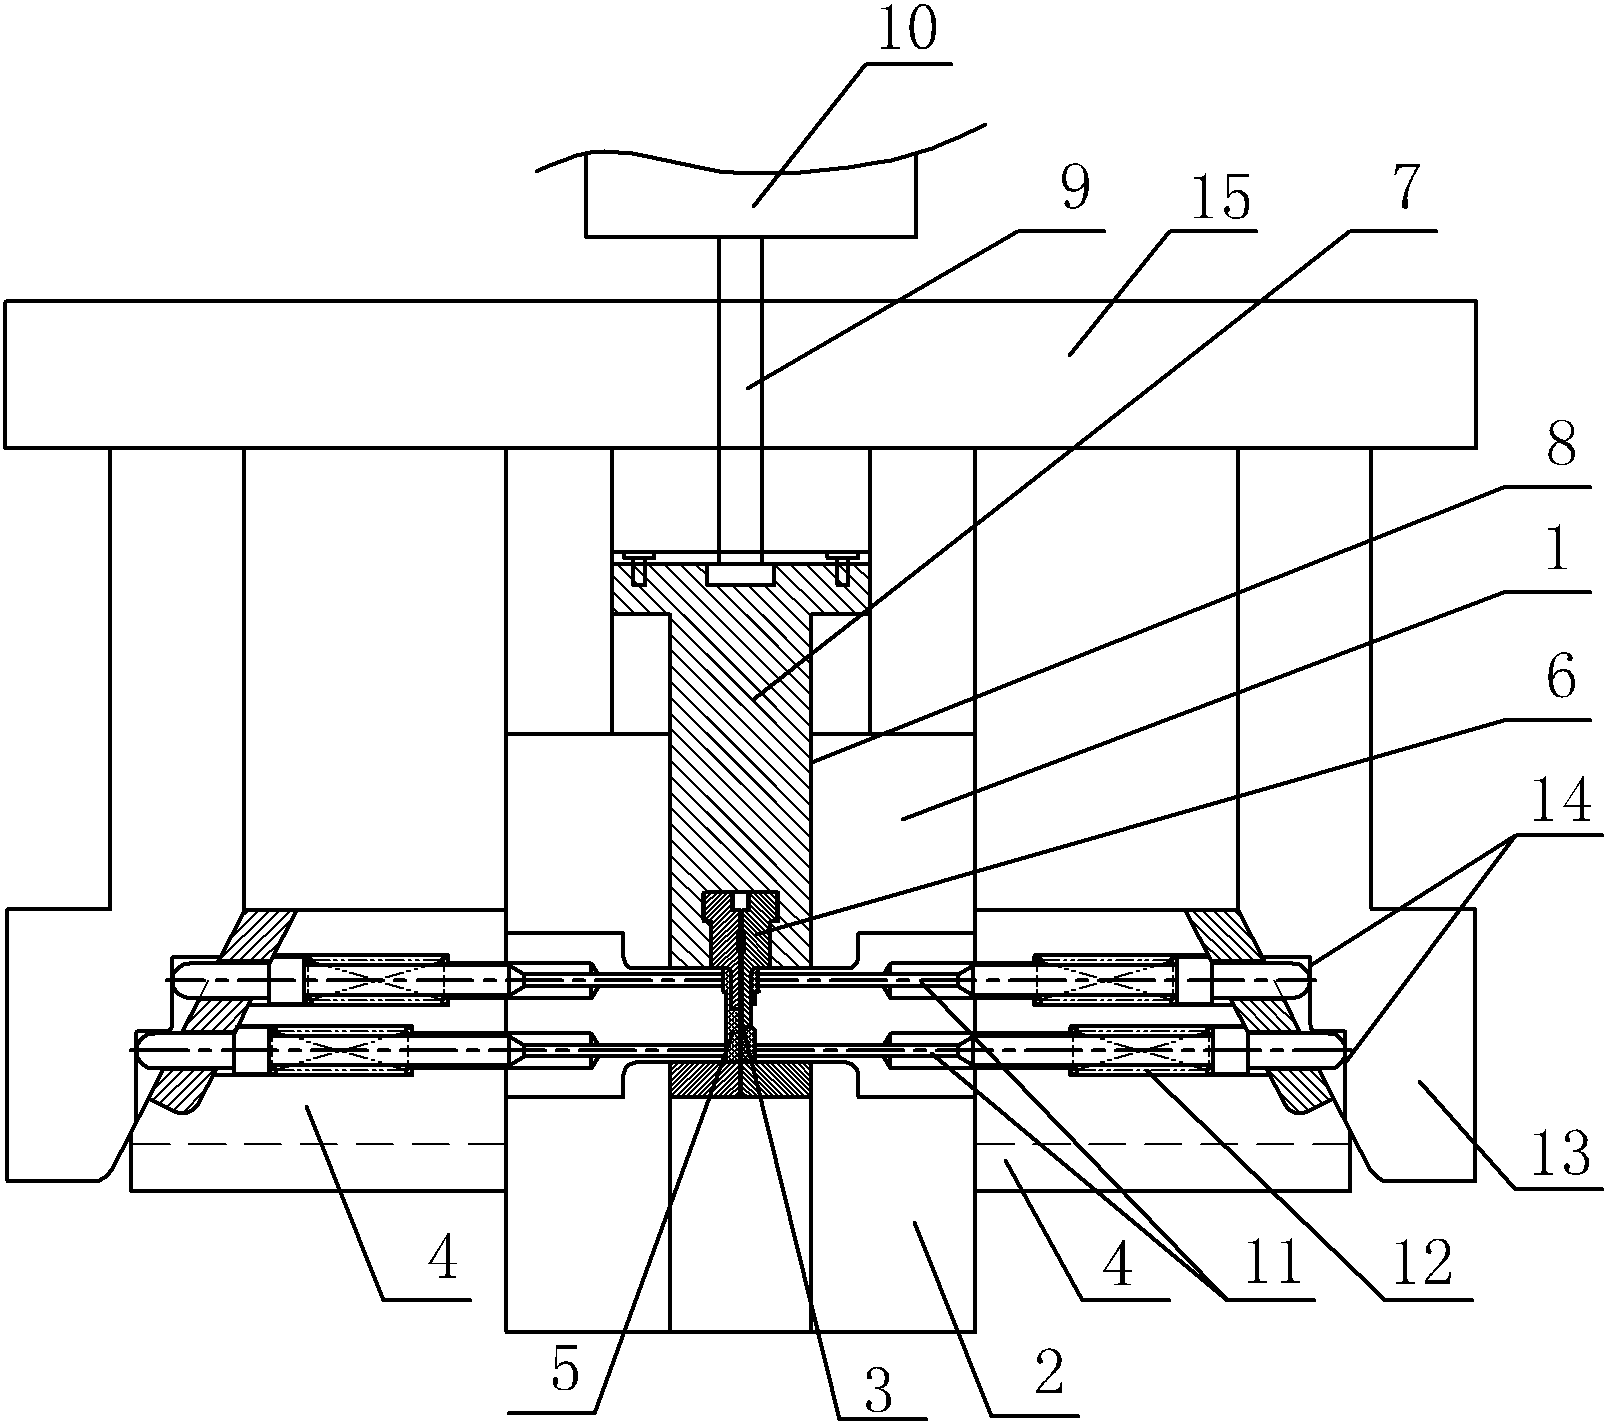 Structure for realizing automatic de-molding of product by utilizing line thimble